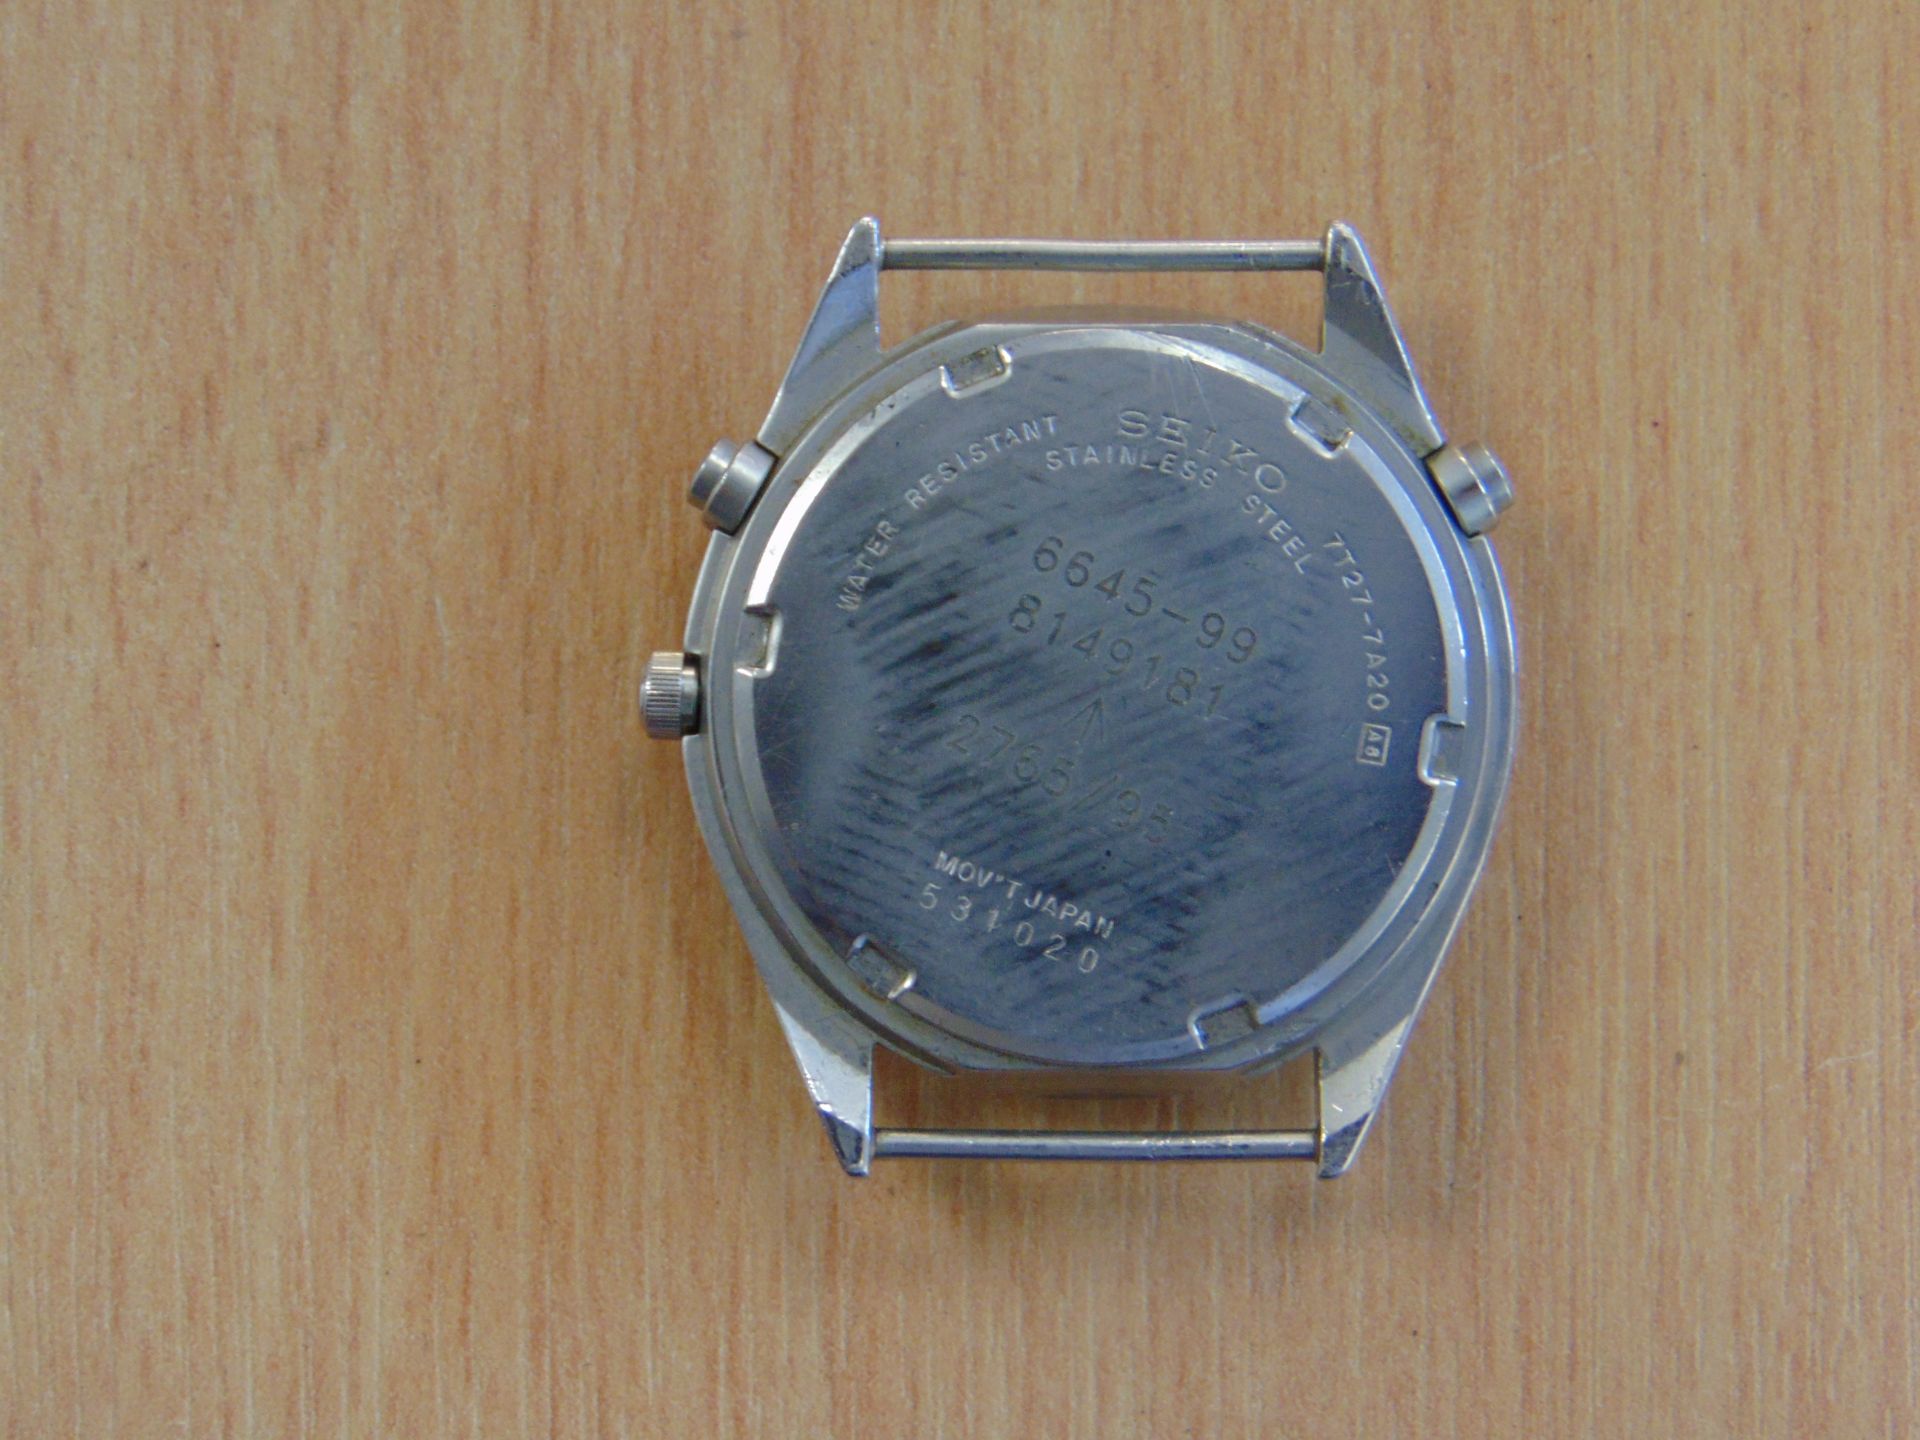 SEIKO GEN 2 RAF ISSUE PILOTS CHRONO WATCH NATO MARKINGS DATED 1995 - Image 5 of 10